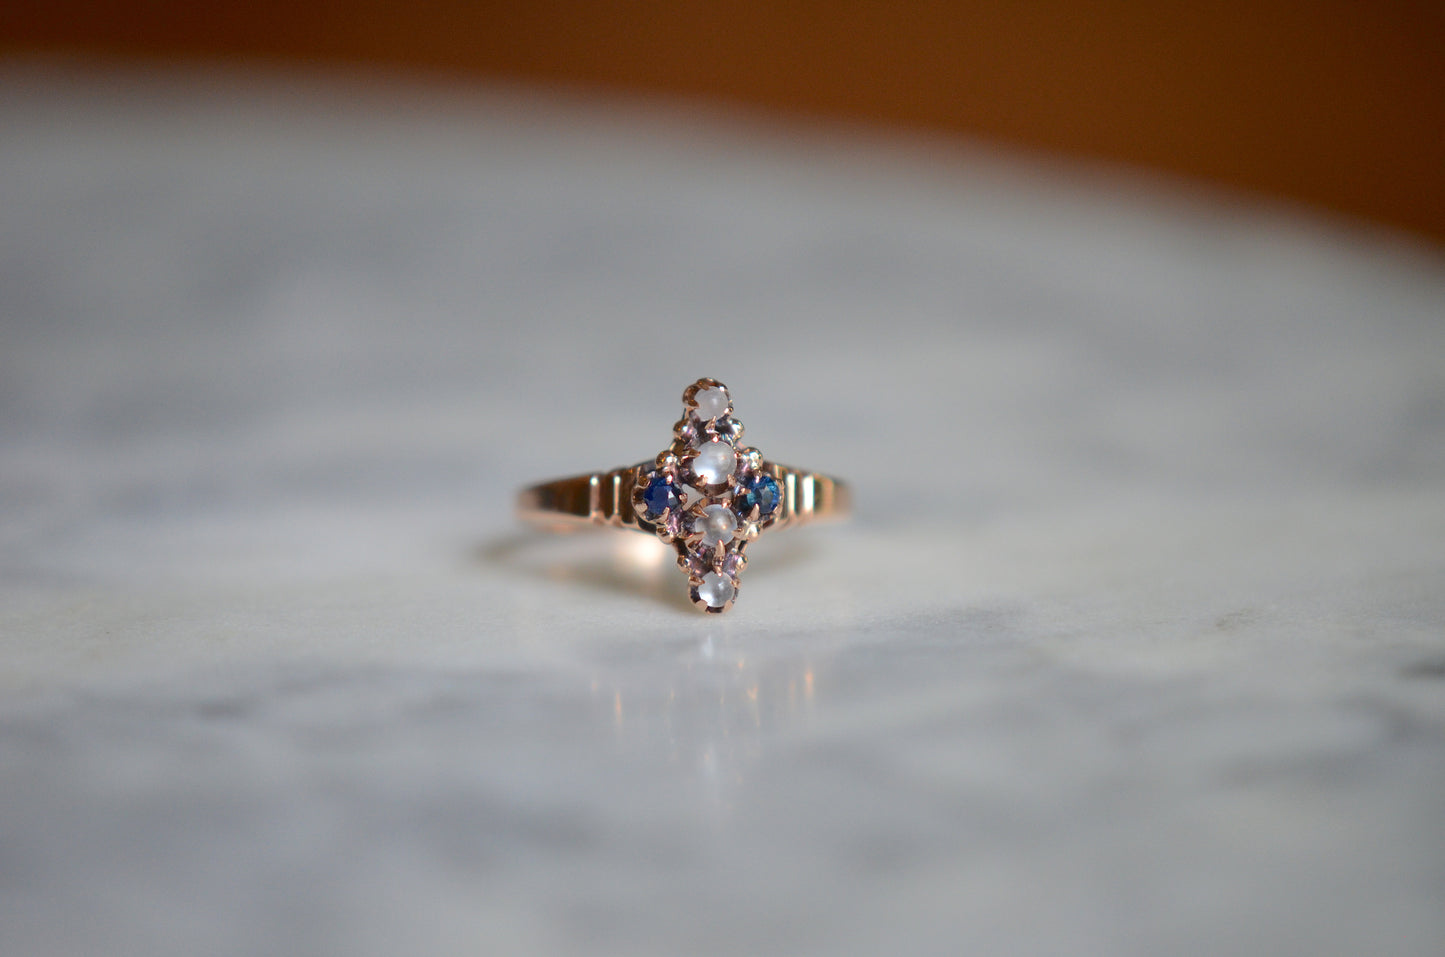 Victorian Moonstone and Sapphire Ring